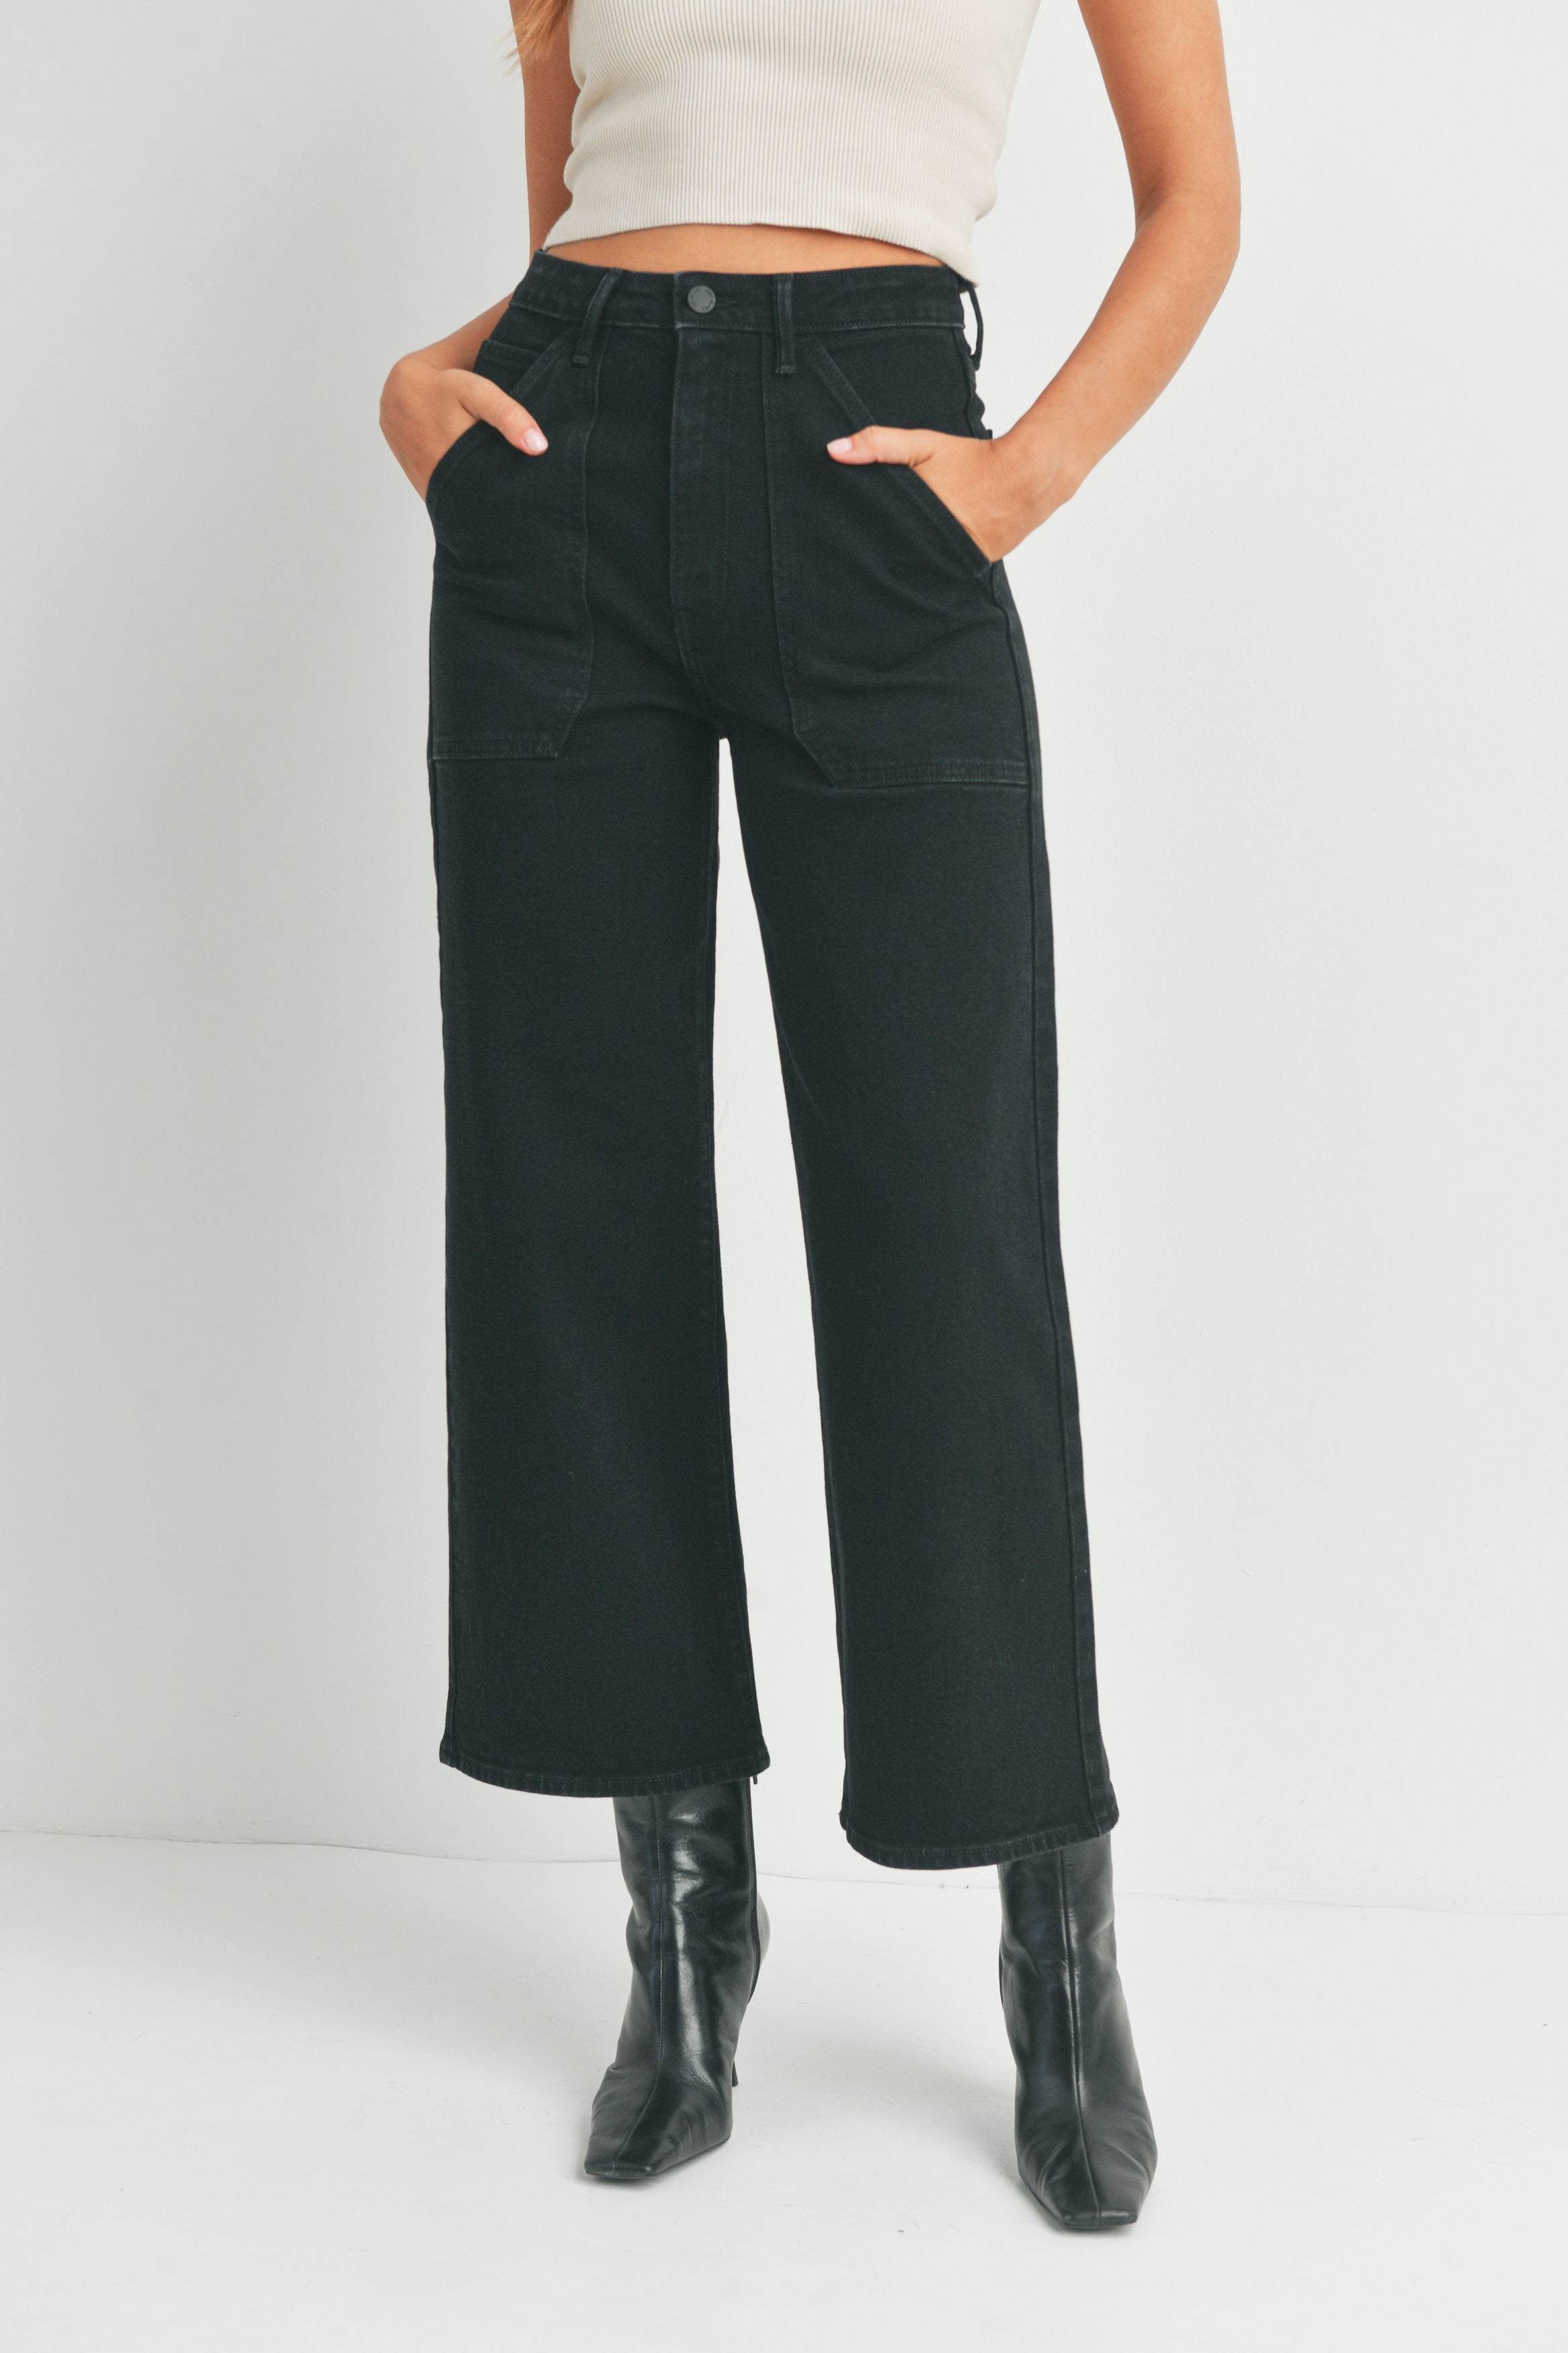 allOut Ladies' High Waist Square Pants [Baggy]